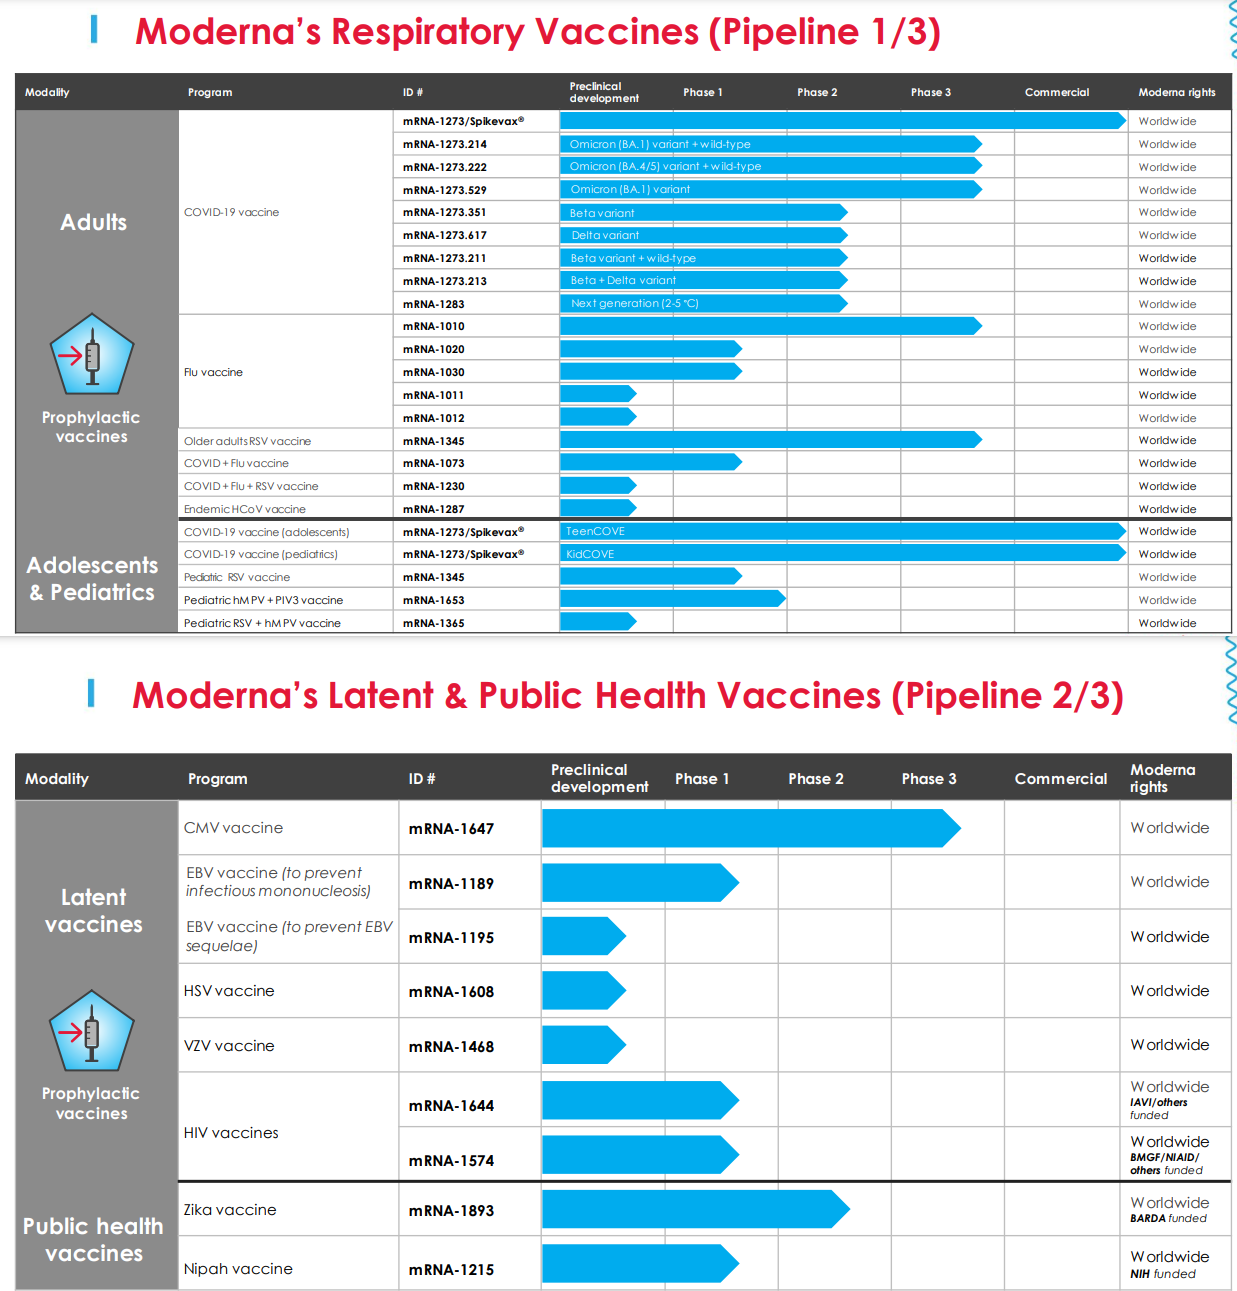 Figure 2 - Moderna has four infectious disease vaccines in Phase 3 trials